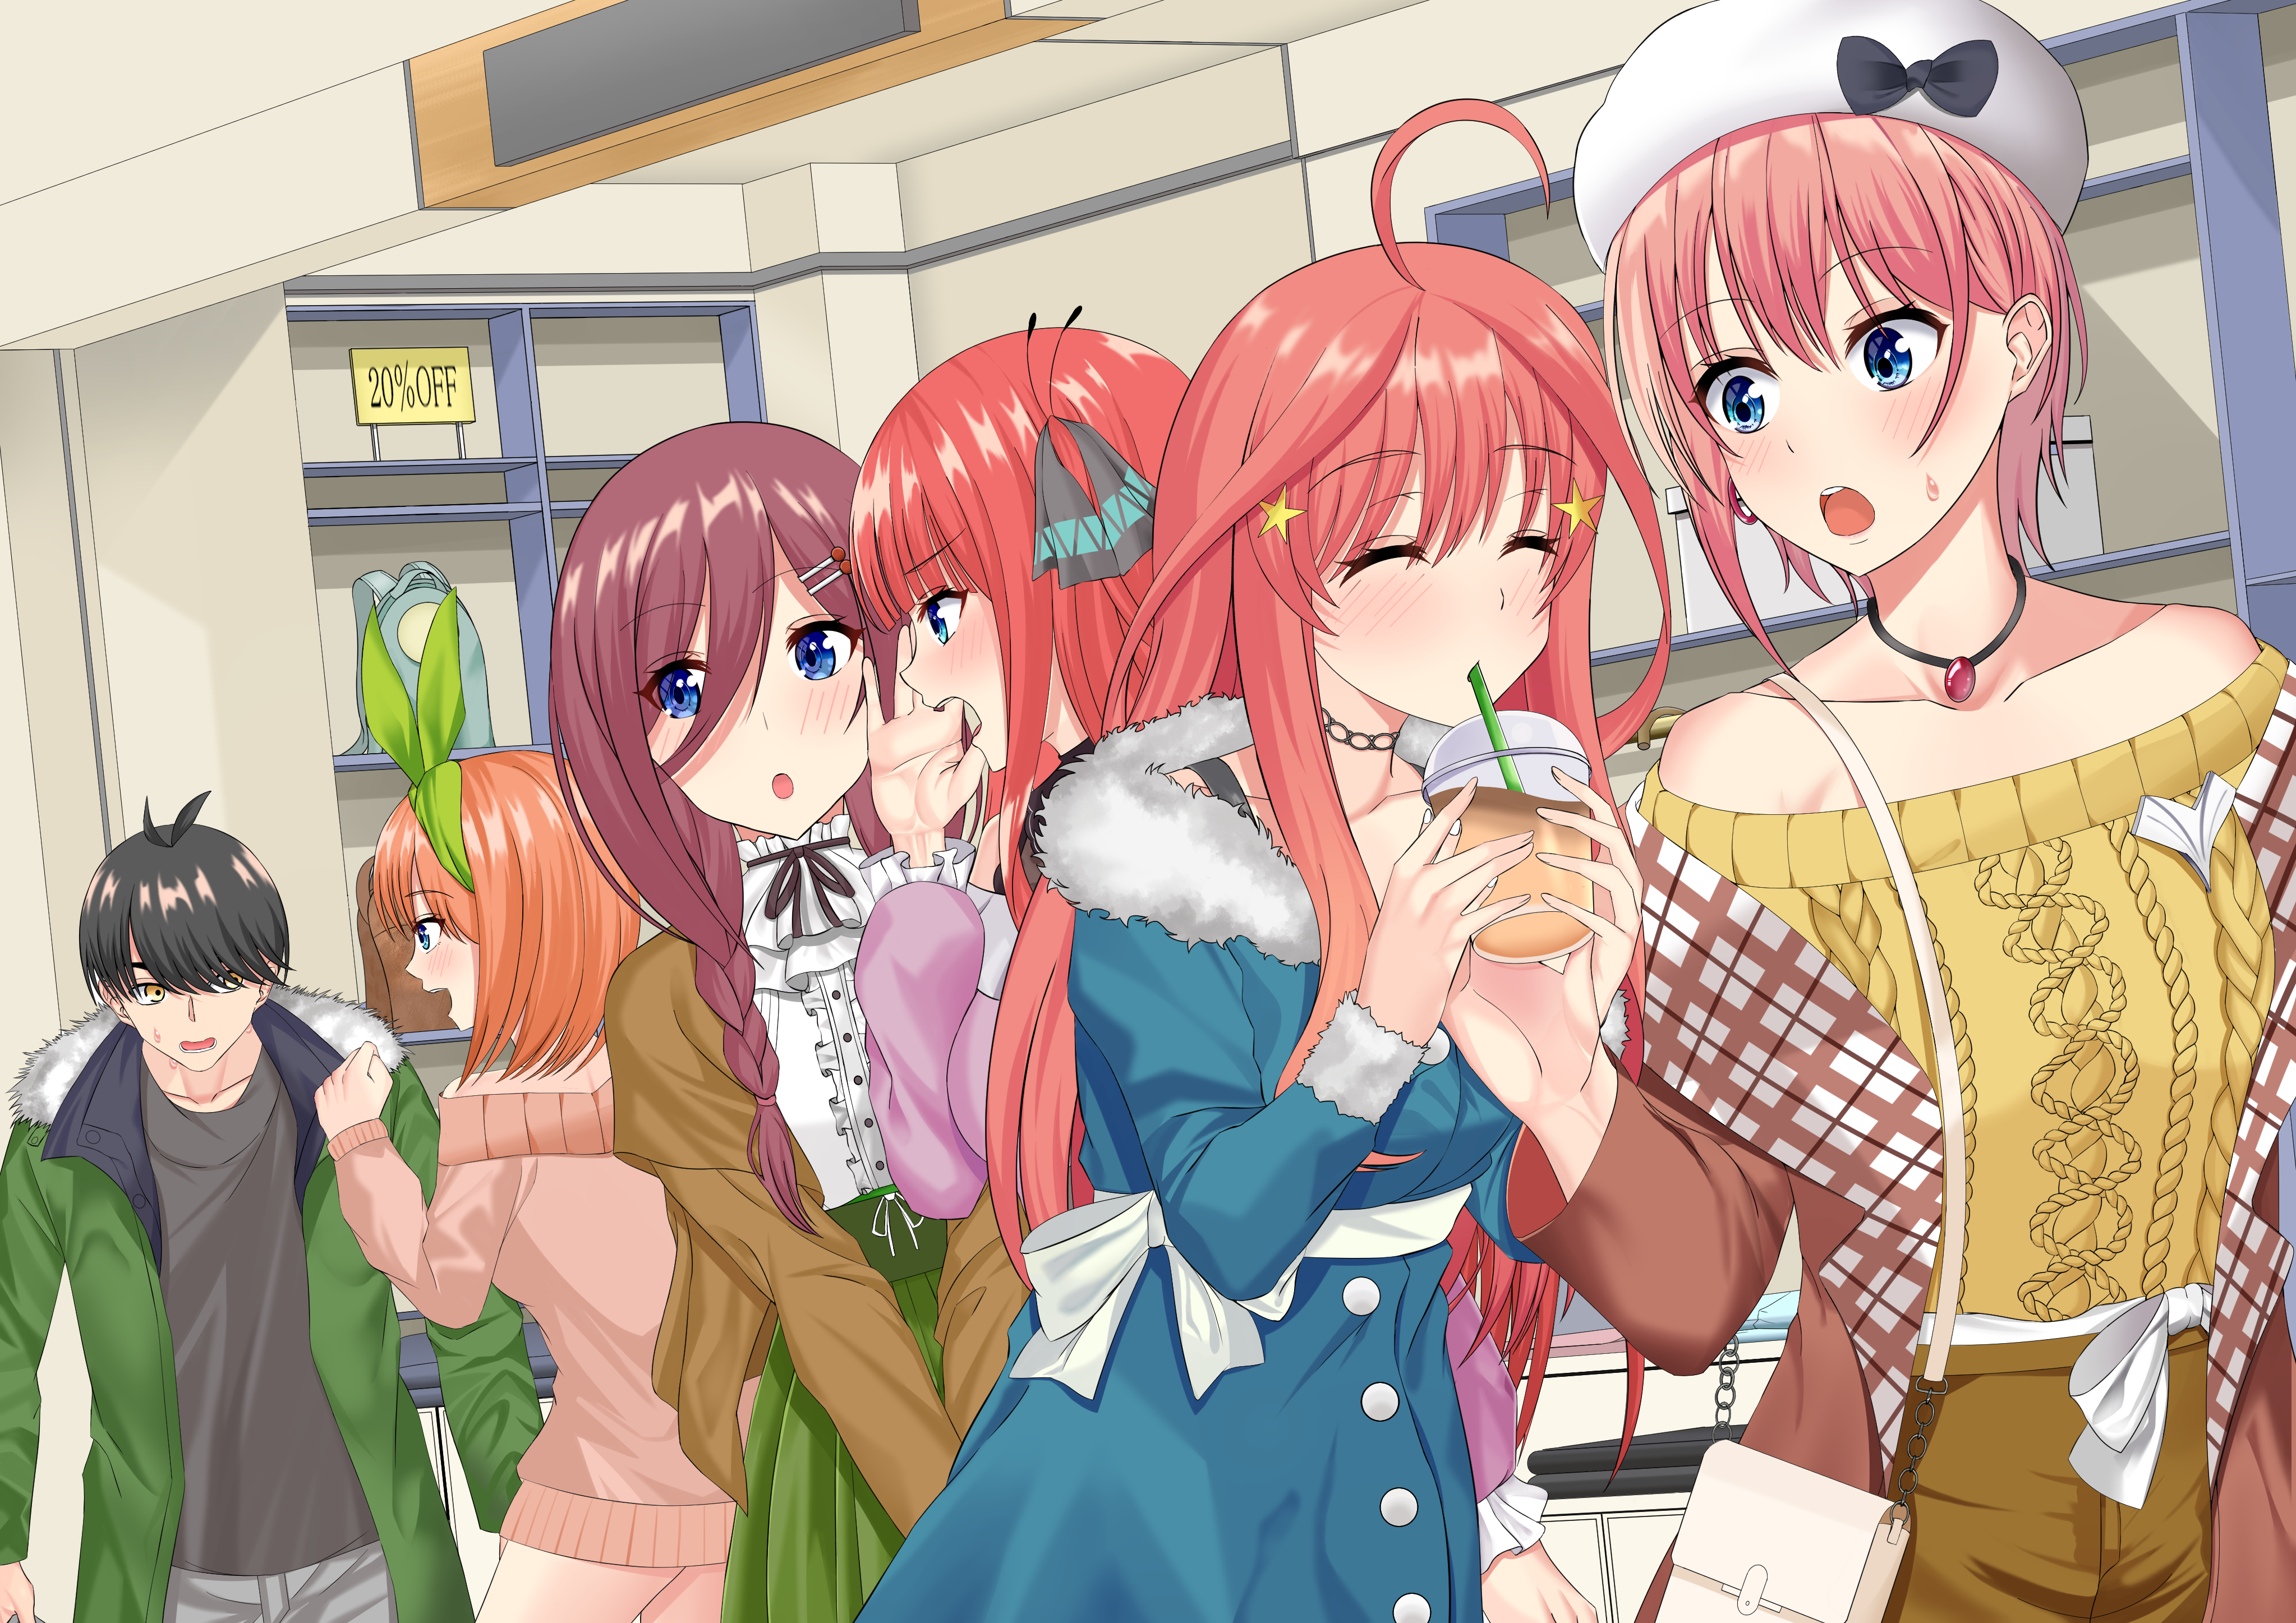 The Quintessential Quintuplets 4k Ultra HD Wallpaper by しゃきしゃききゃべつ